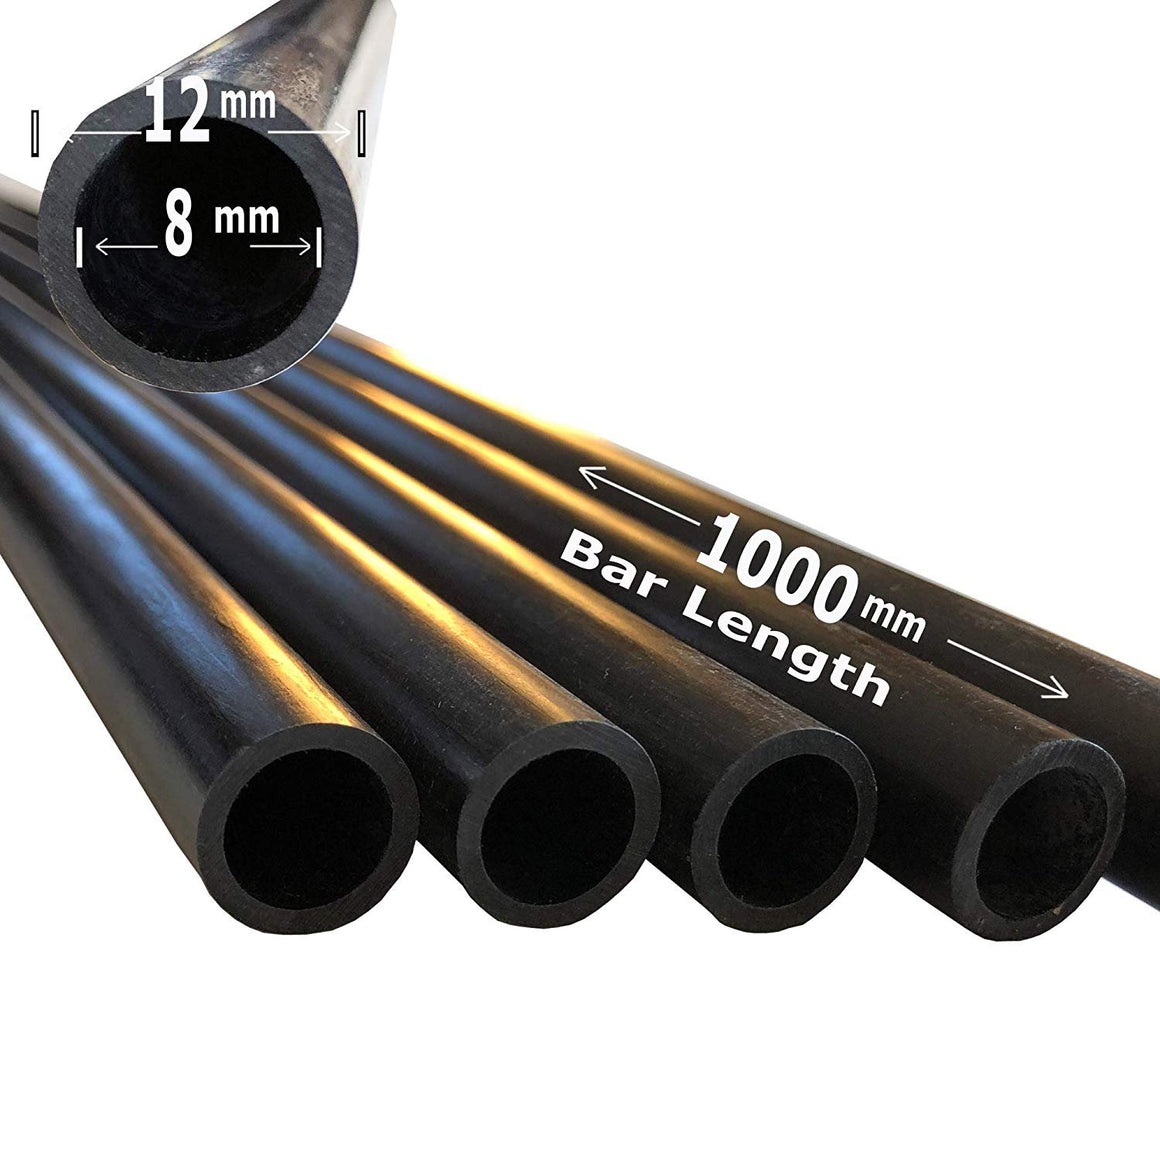 (1) Piece - 12mm x 8mm x 1000mm Carbon Fiber Tube - Pultruded Round Tube. Super High Strength for RC Hobbies, Drones, Special Projects